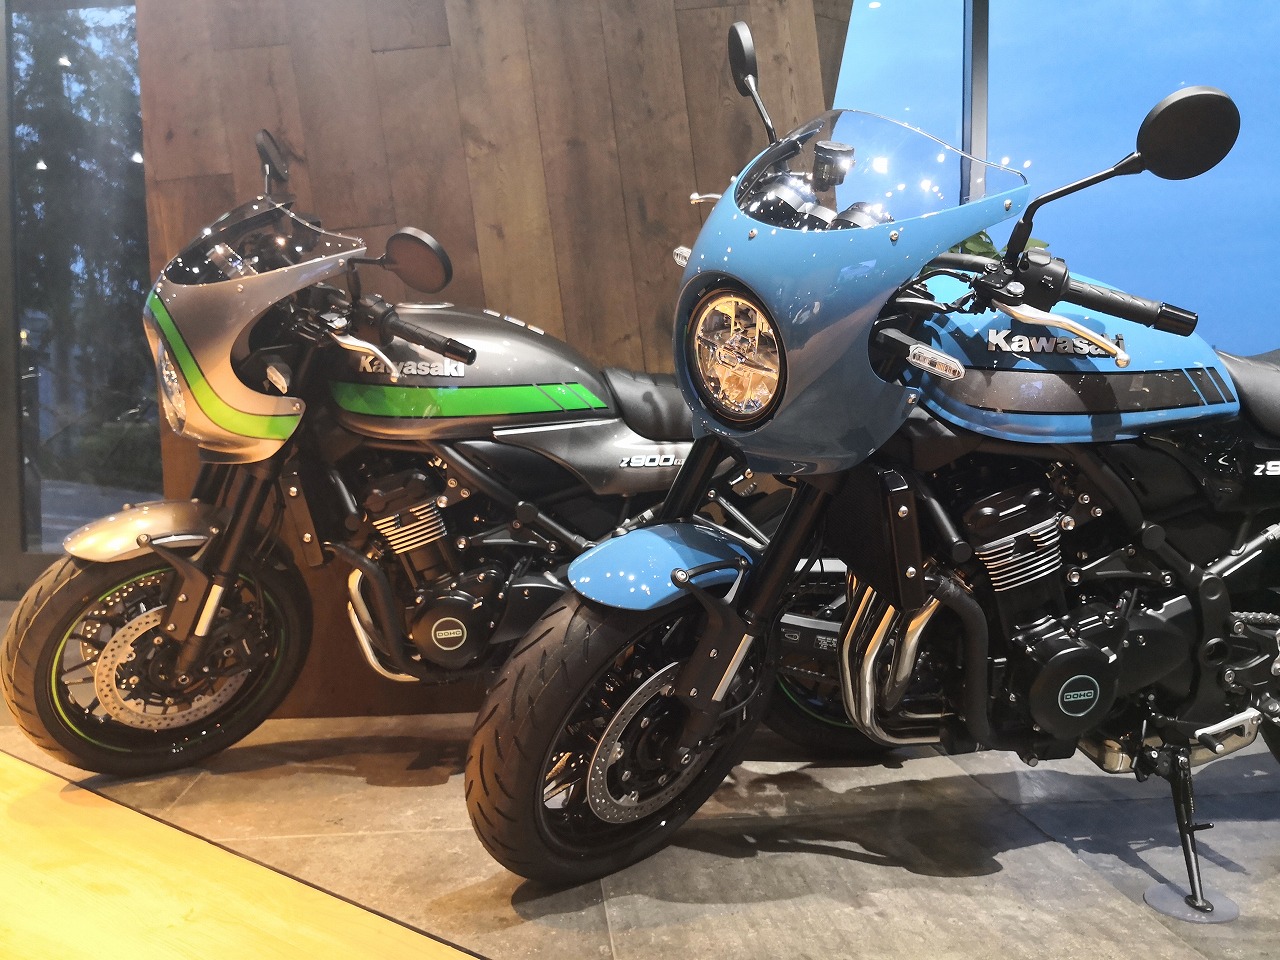 Z900RSカフェ 2019年モデル 通販